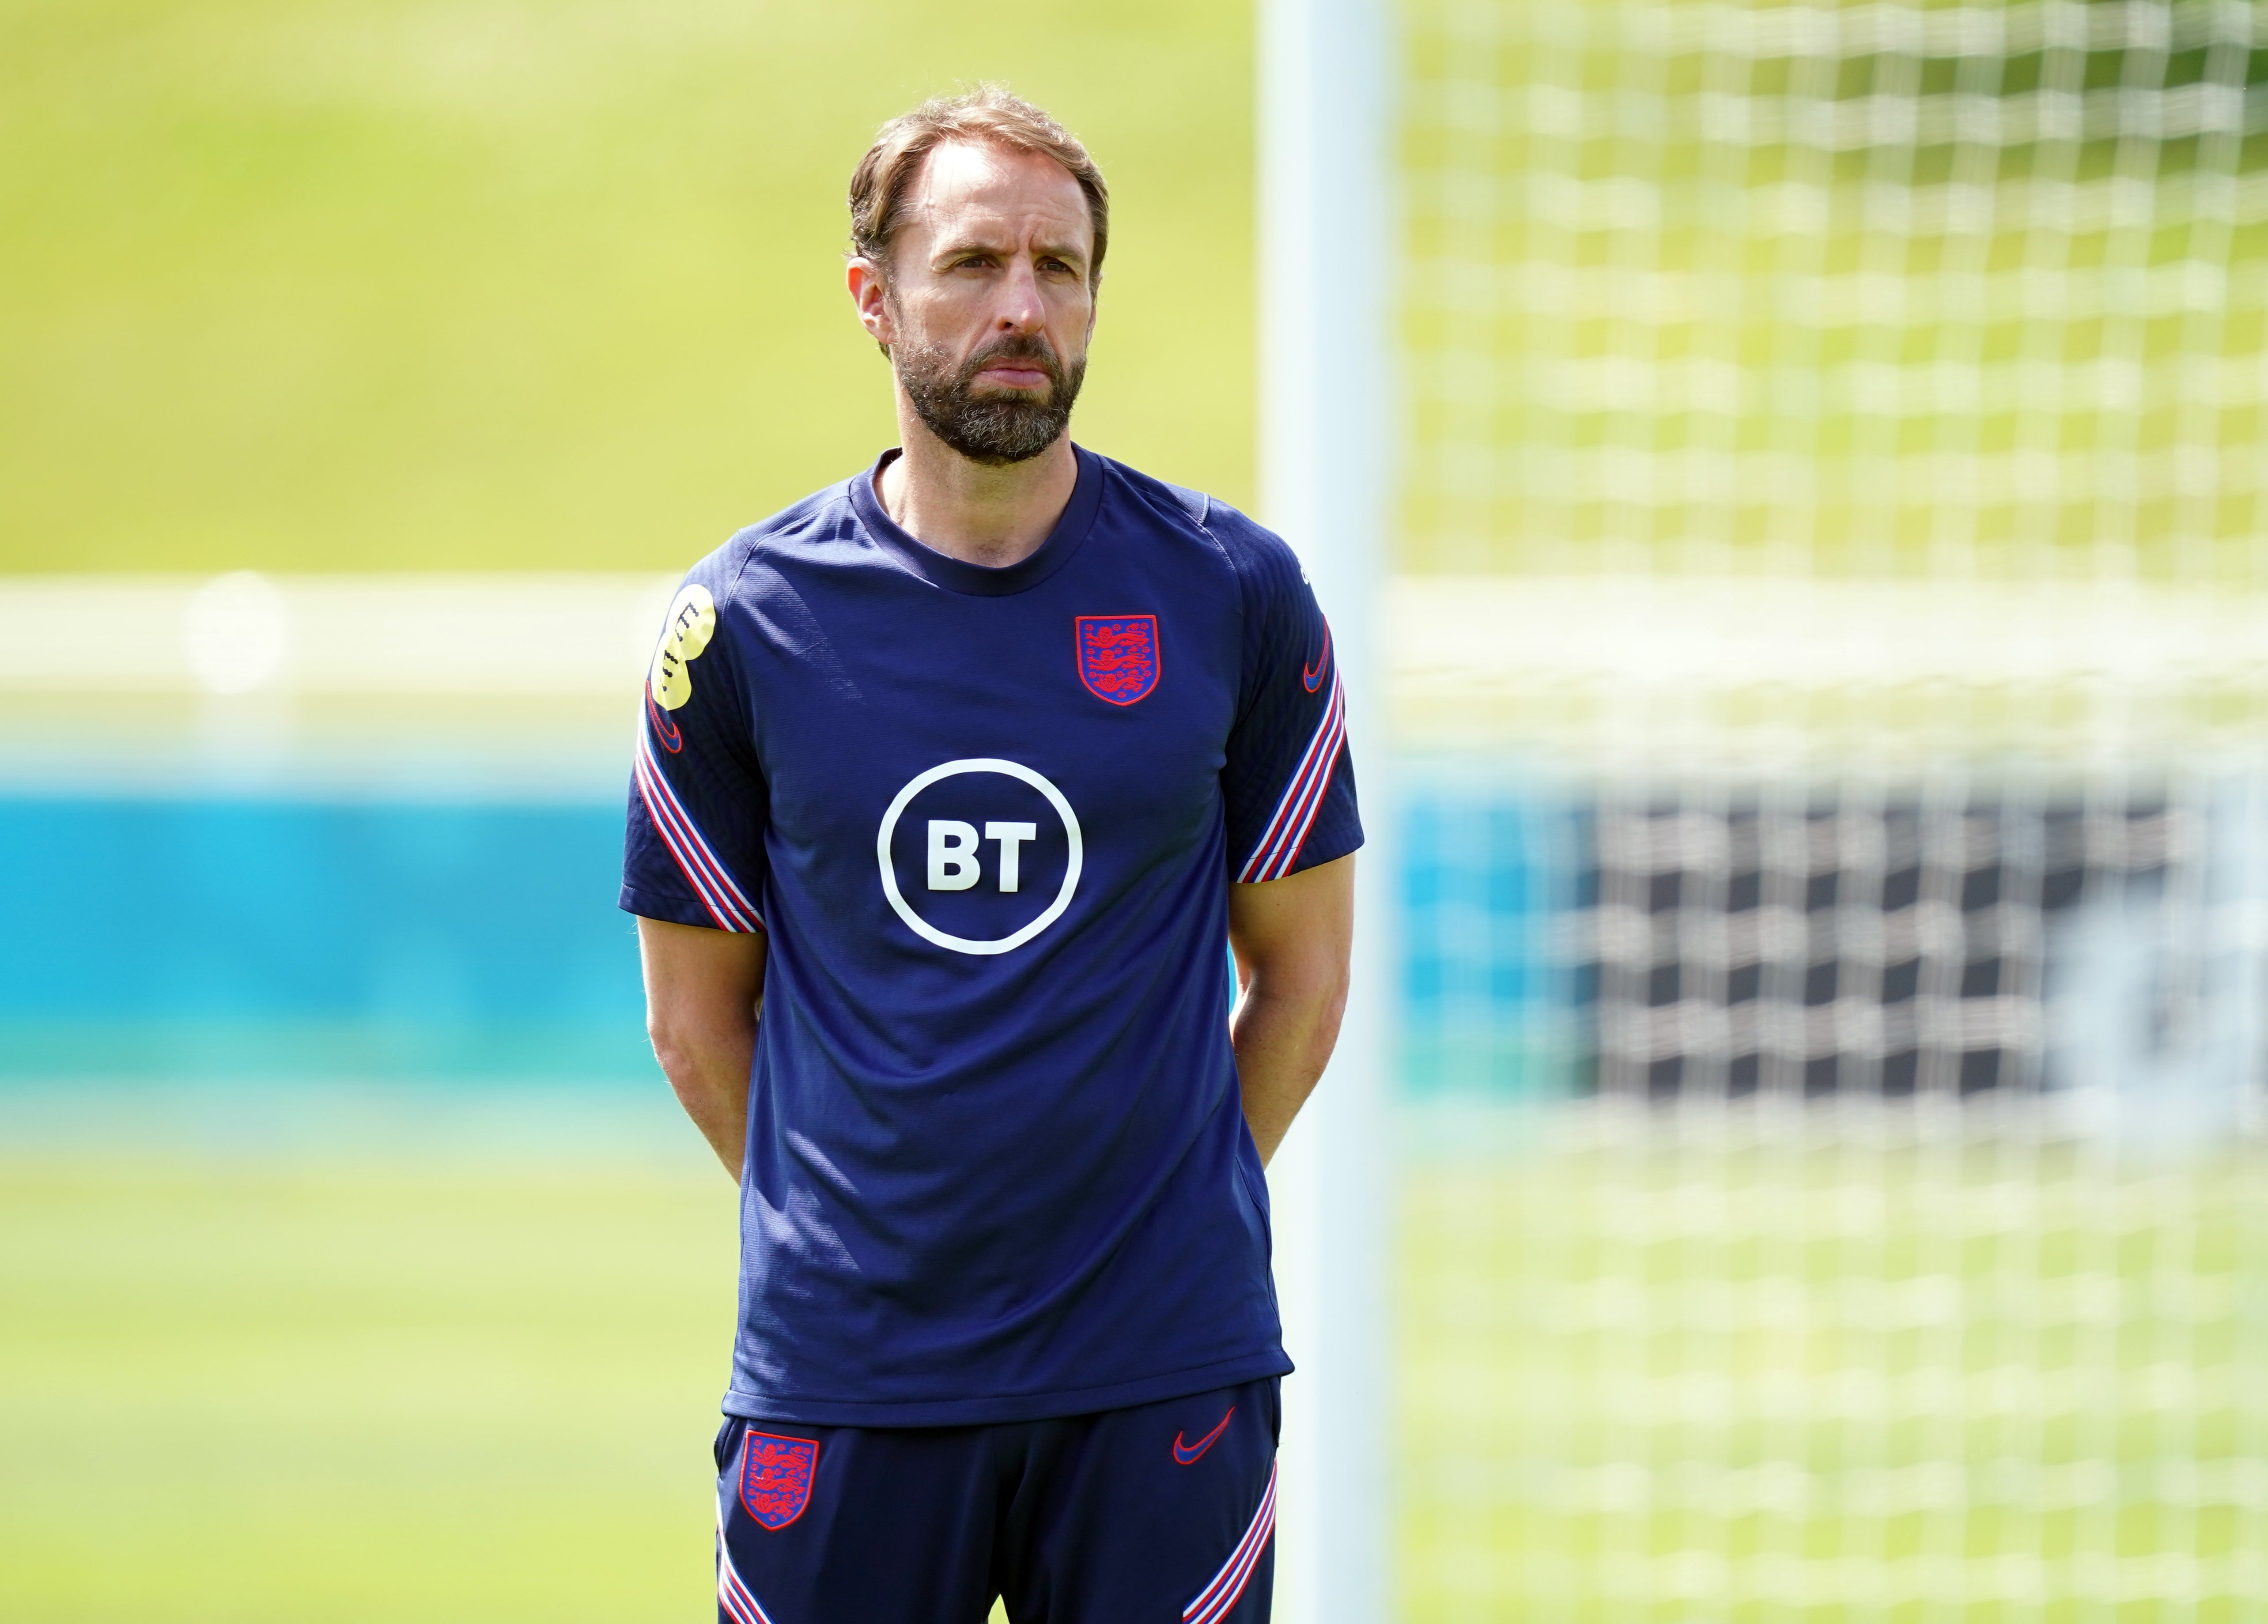 England manager Gareth Southgate sees his side take on Italy in the Euro 2020 final on Sunday